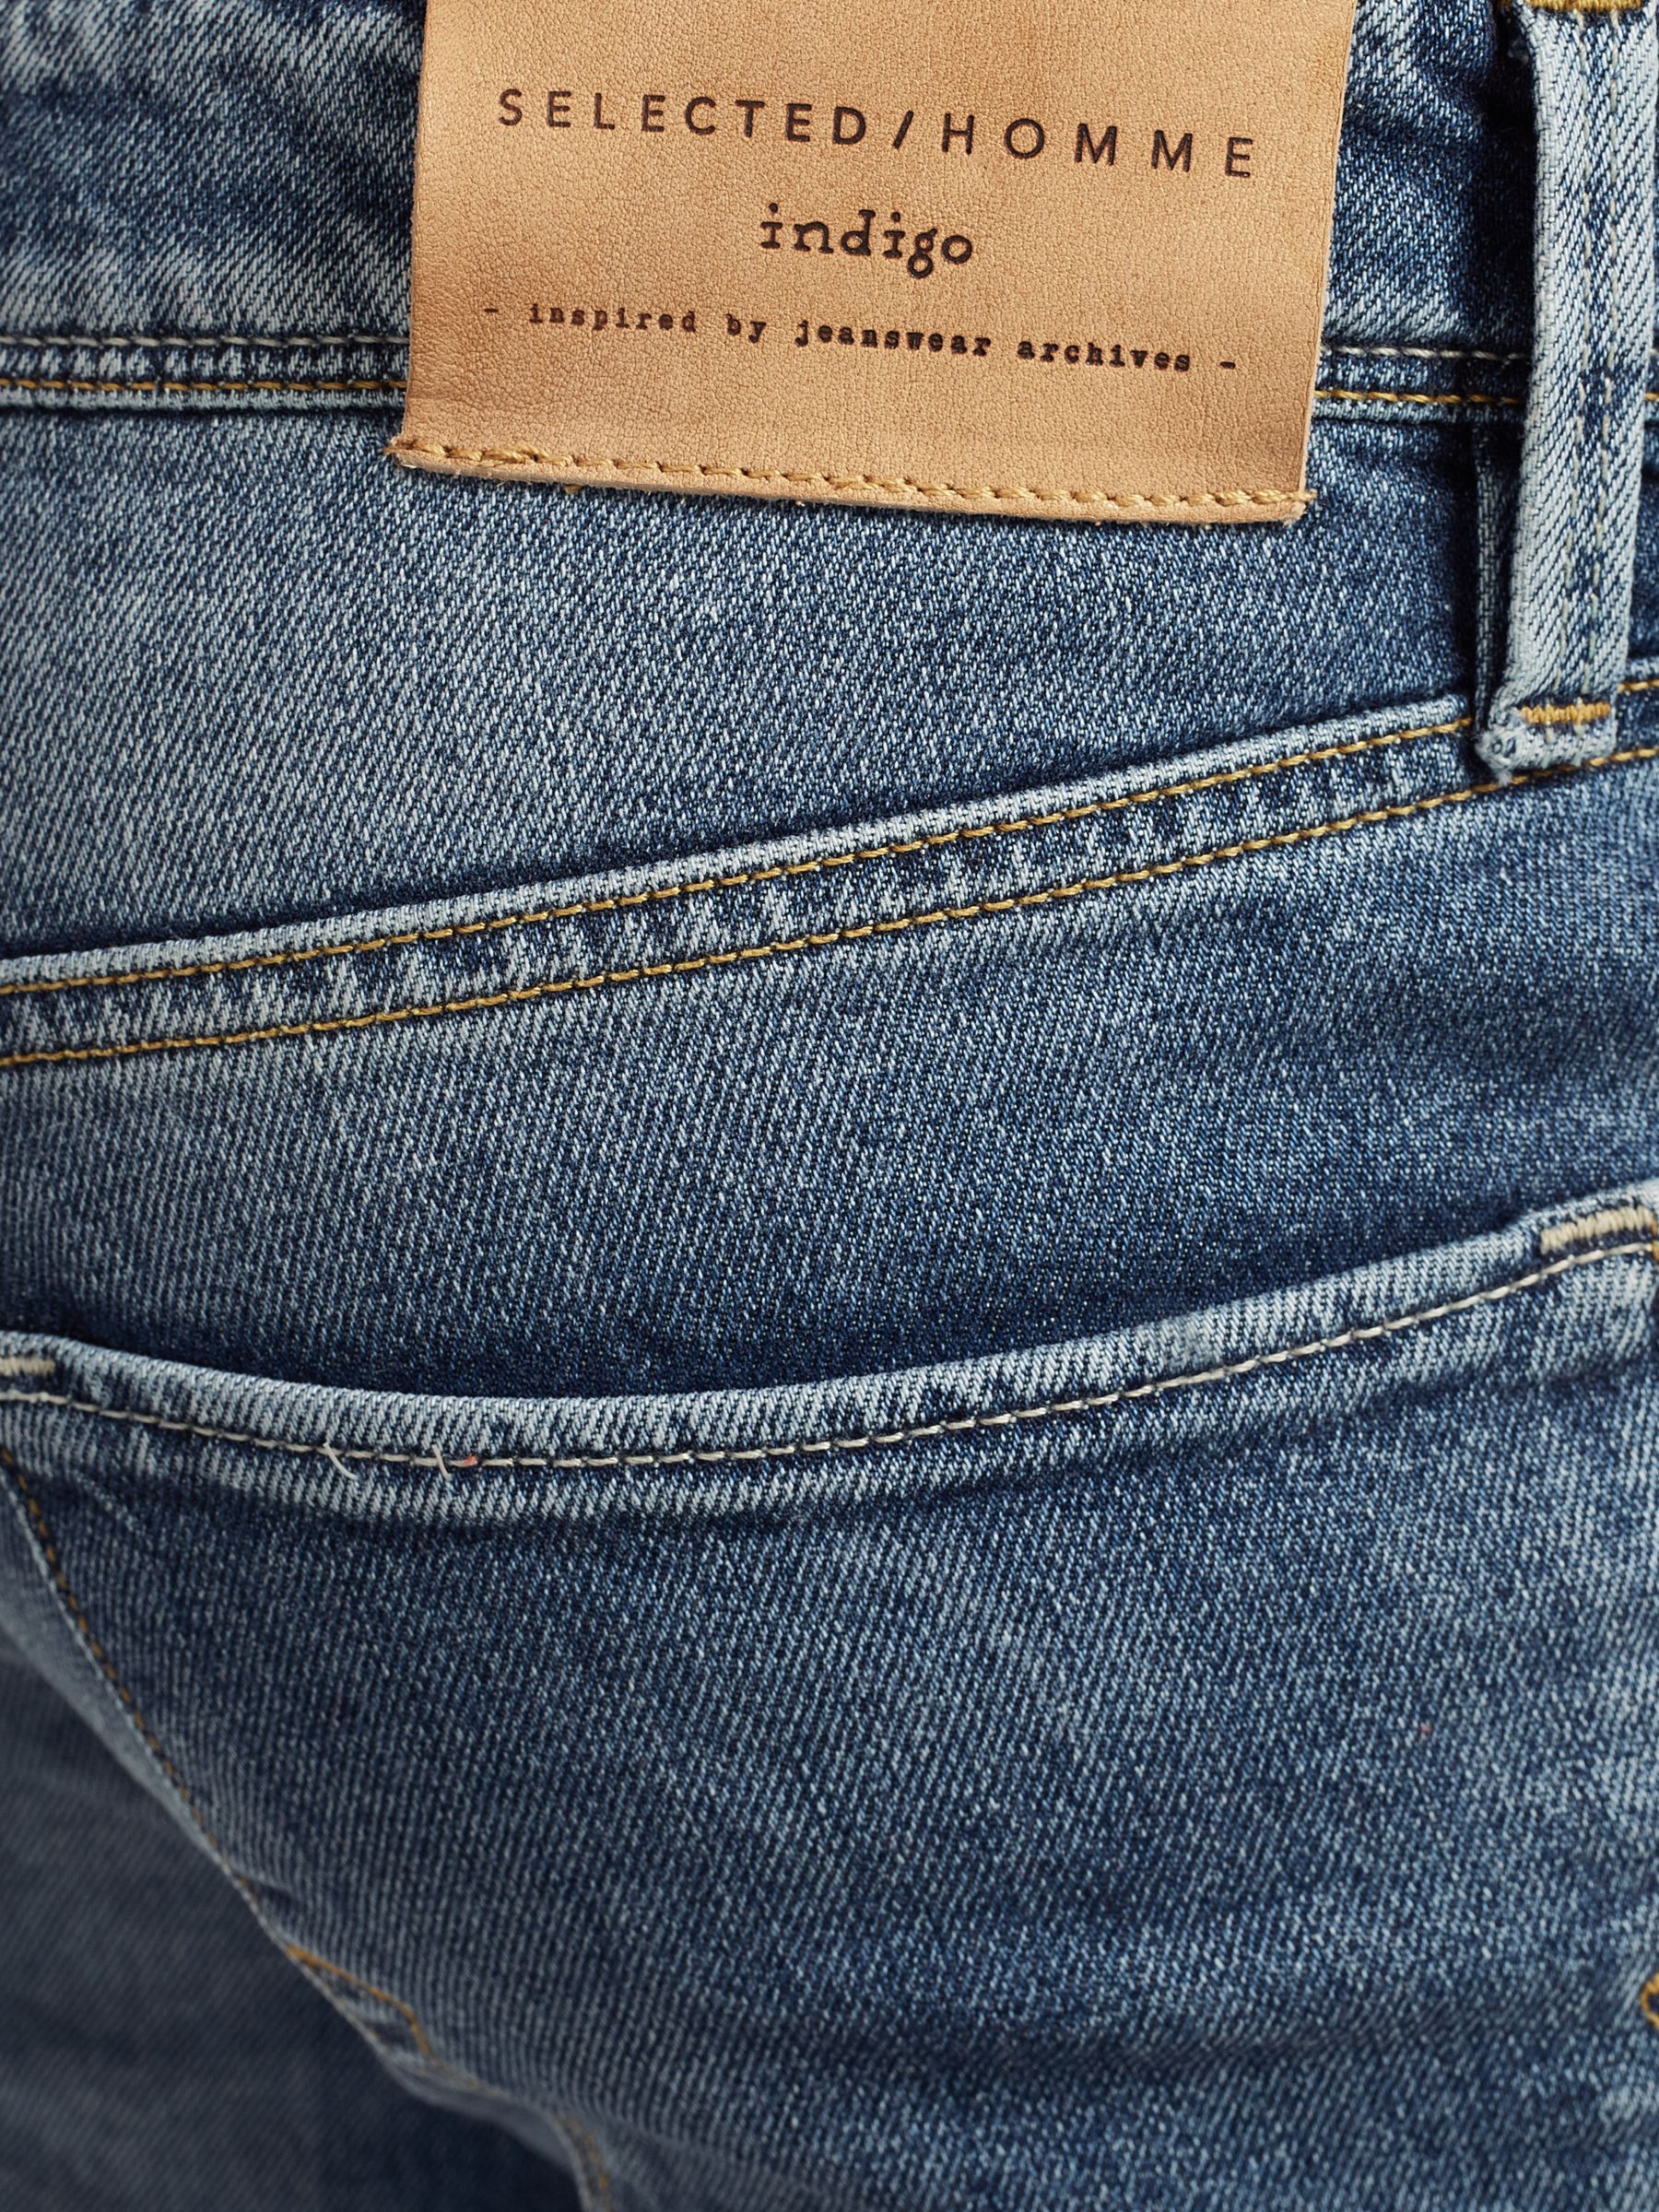 selected homme jeans